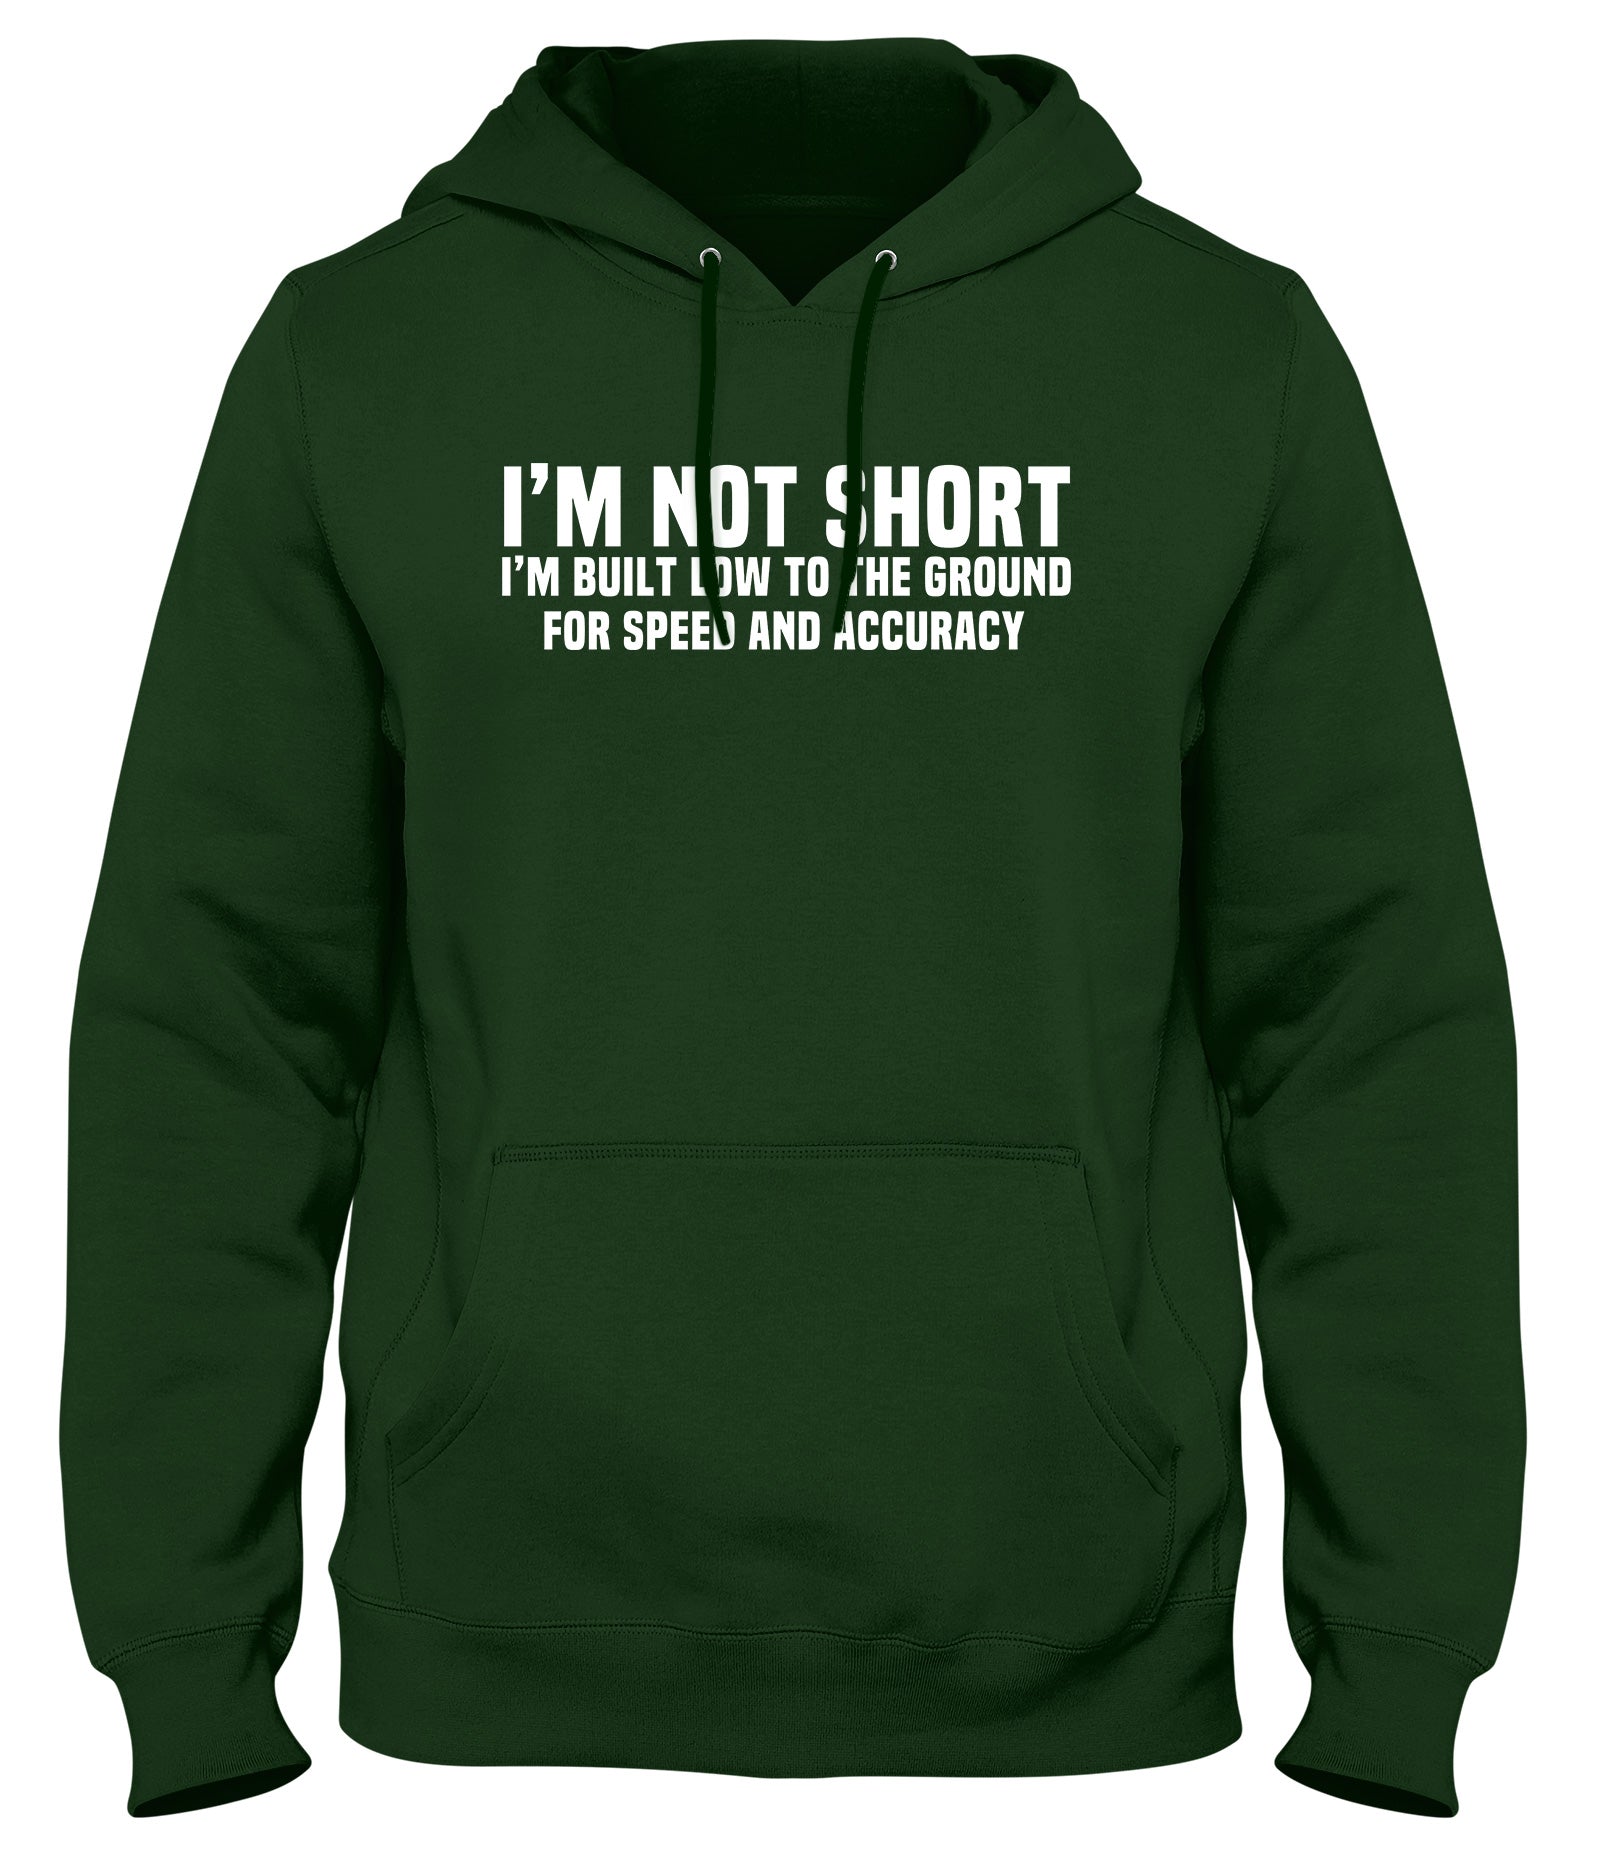 I'M NOT SHORT I'M BUILT LOW TO THE GROUND FOR SPEED AND ACCURACY MENS WOMENS UNISEX FUNNY HOODIE